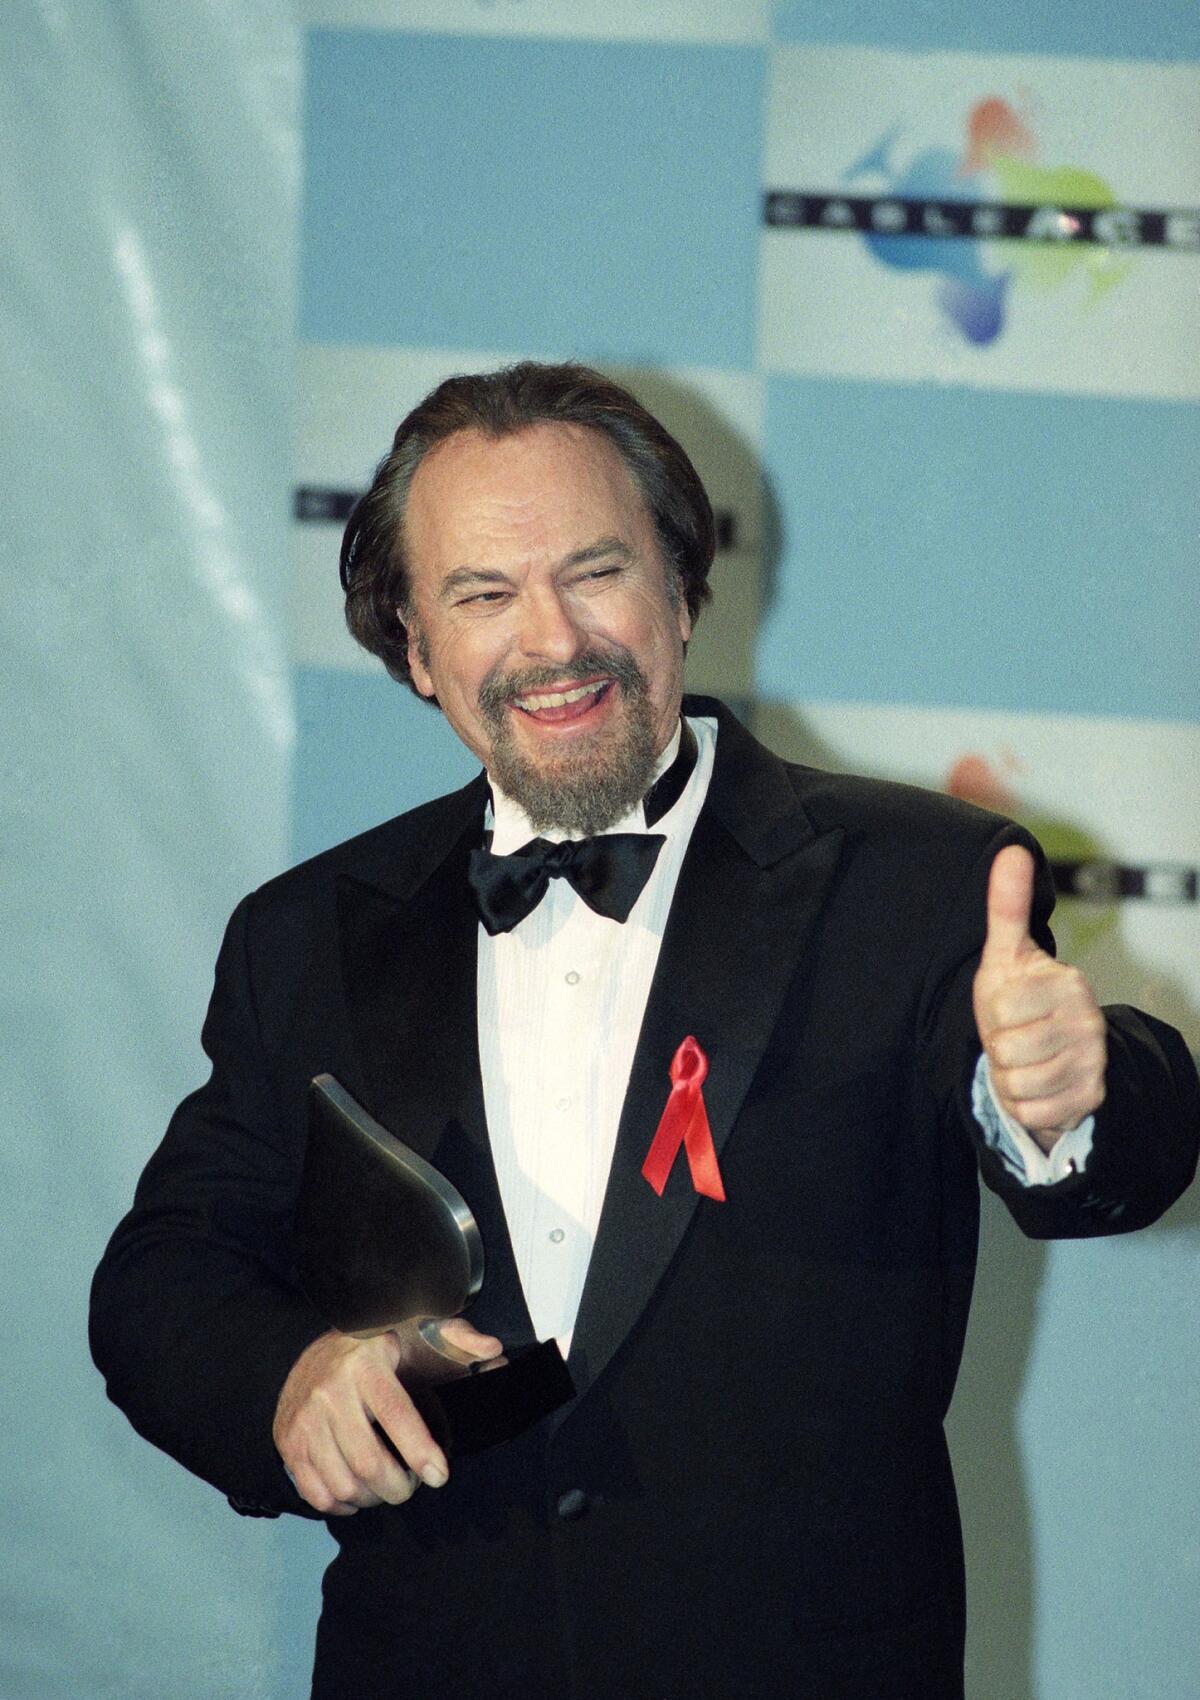 Rip Torn gives a thumbs-up to photographers after winning the Emmy for Actor in a Comedy Series for HBO's "The Larry Sanders Show" in 1995.